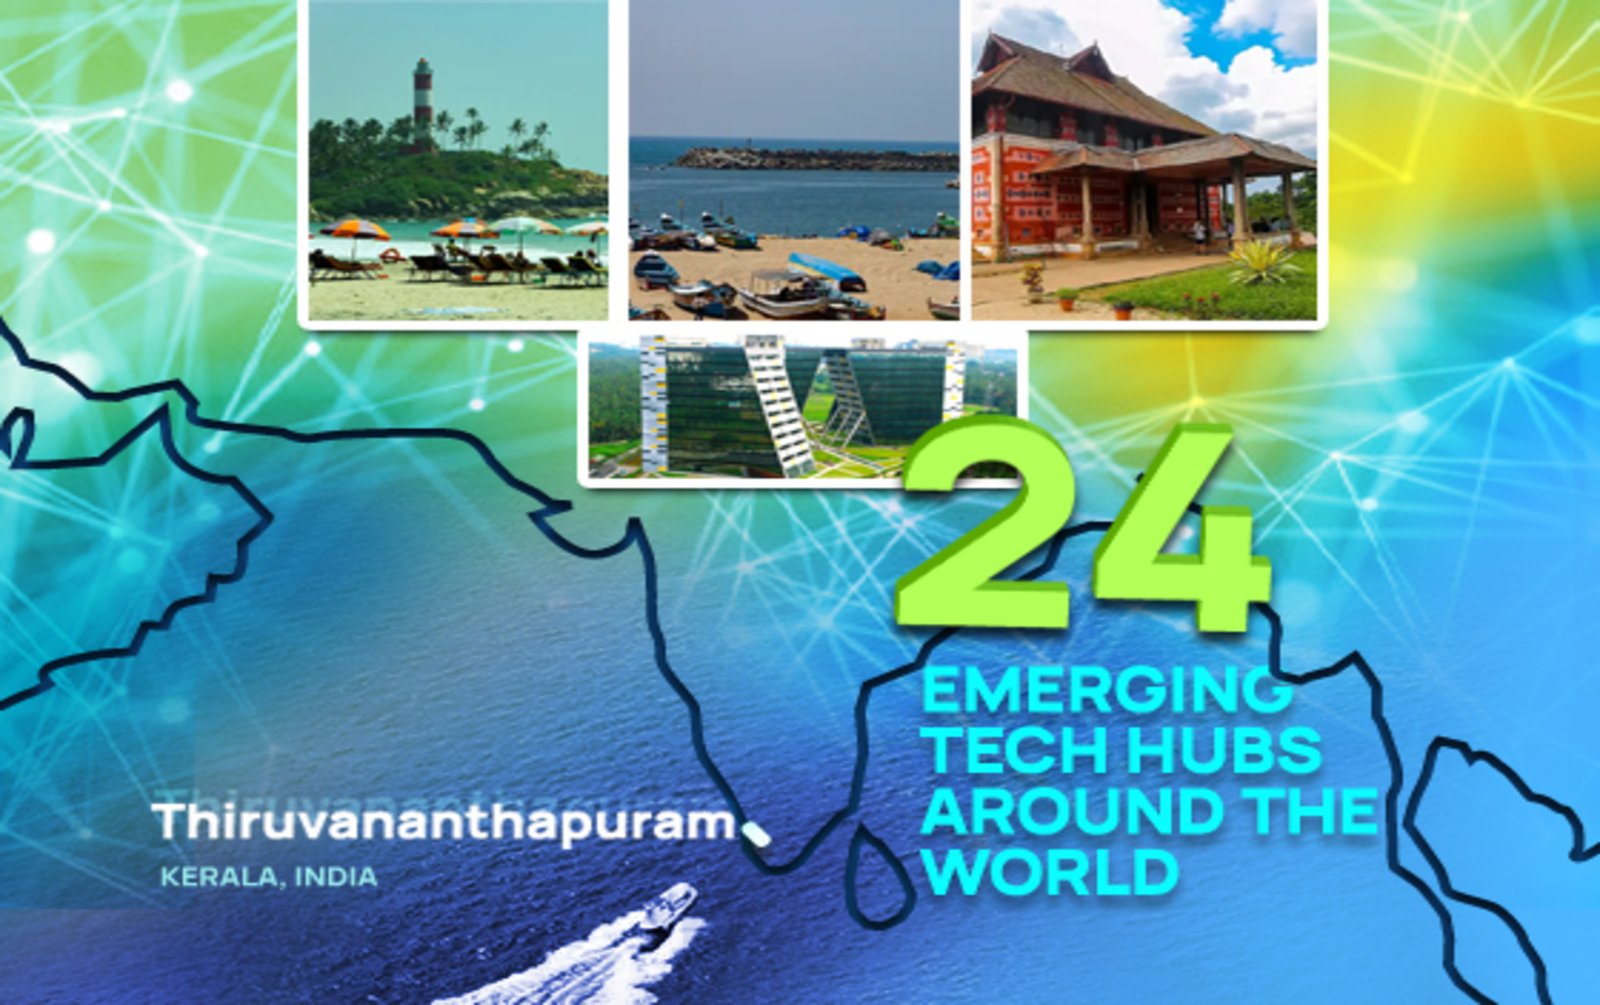 Thiruvananthapuram is among the top 24 tech locations in the world